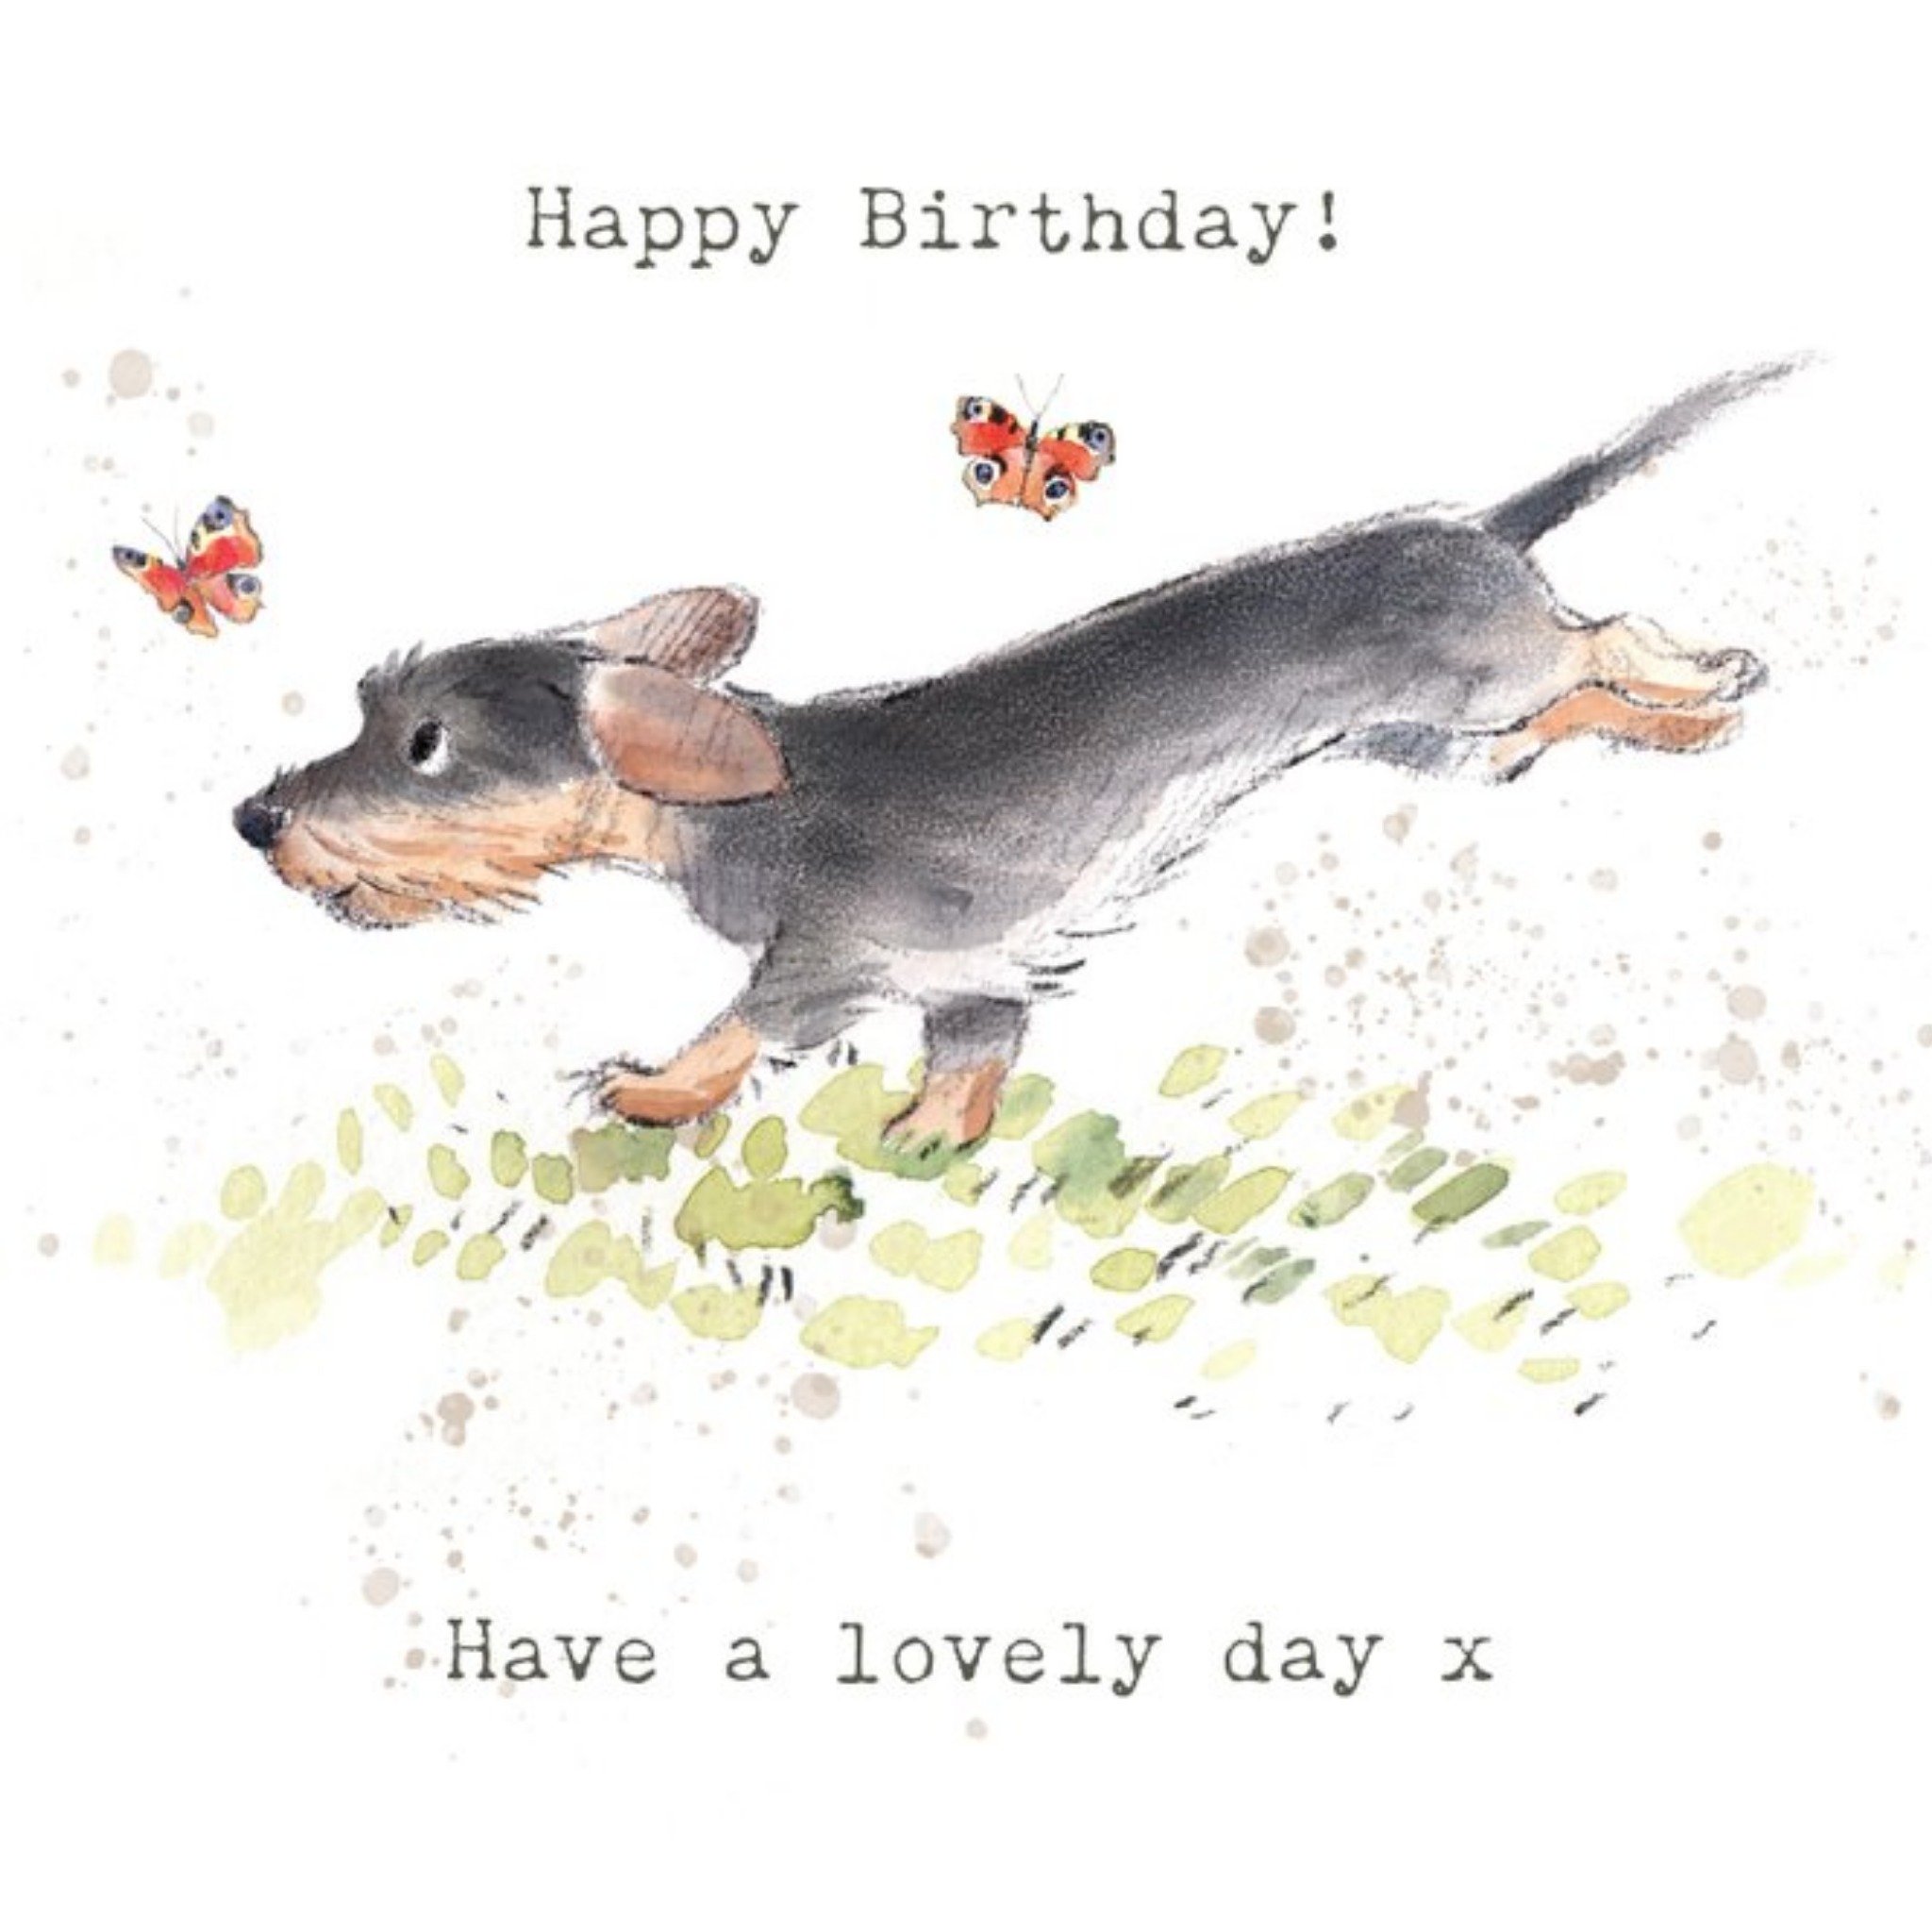 Moonpig Illustration Of A Cute Dog Chasing Butterflies Birthday Card, Square